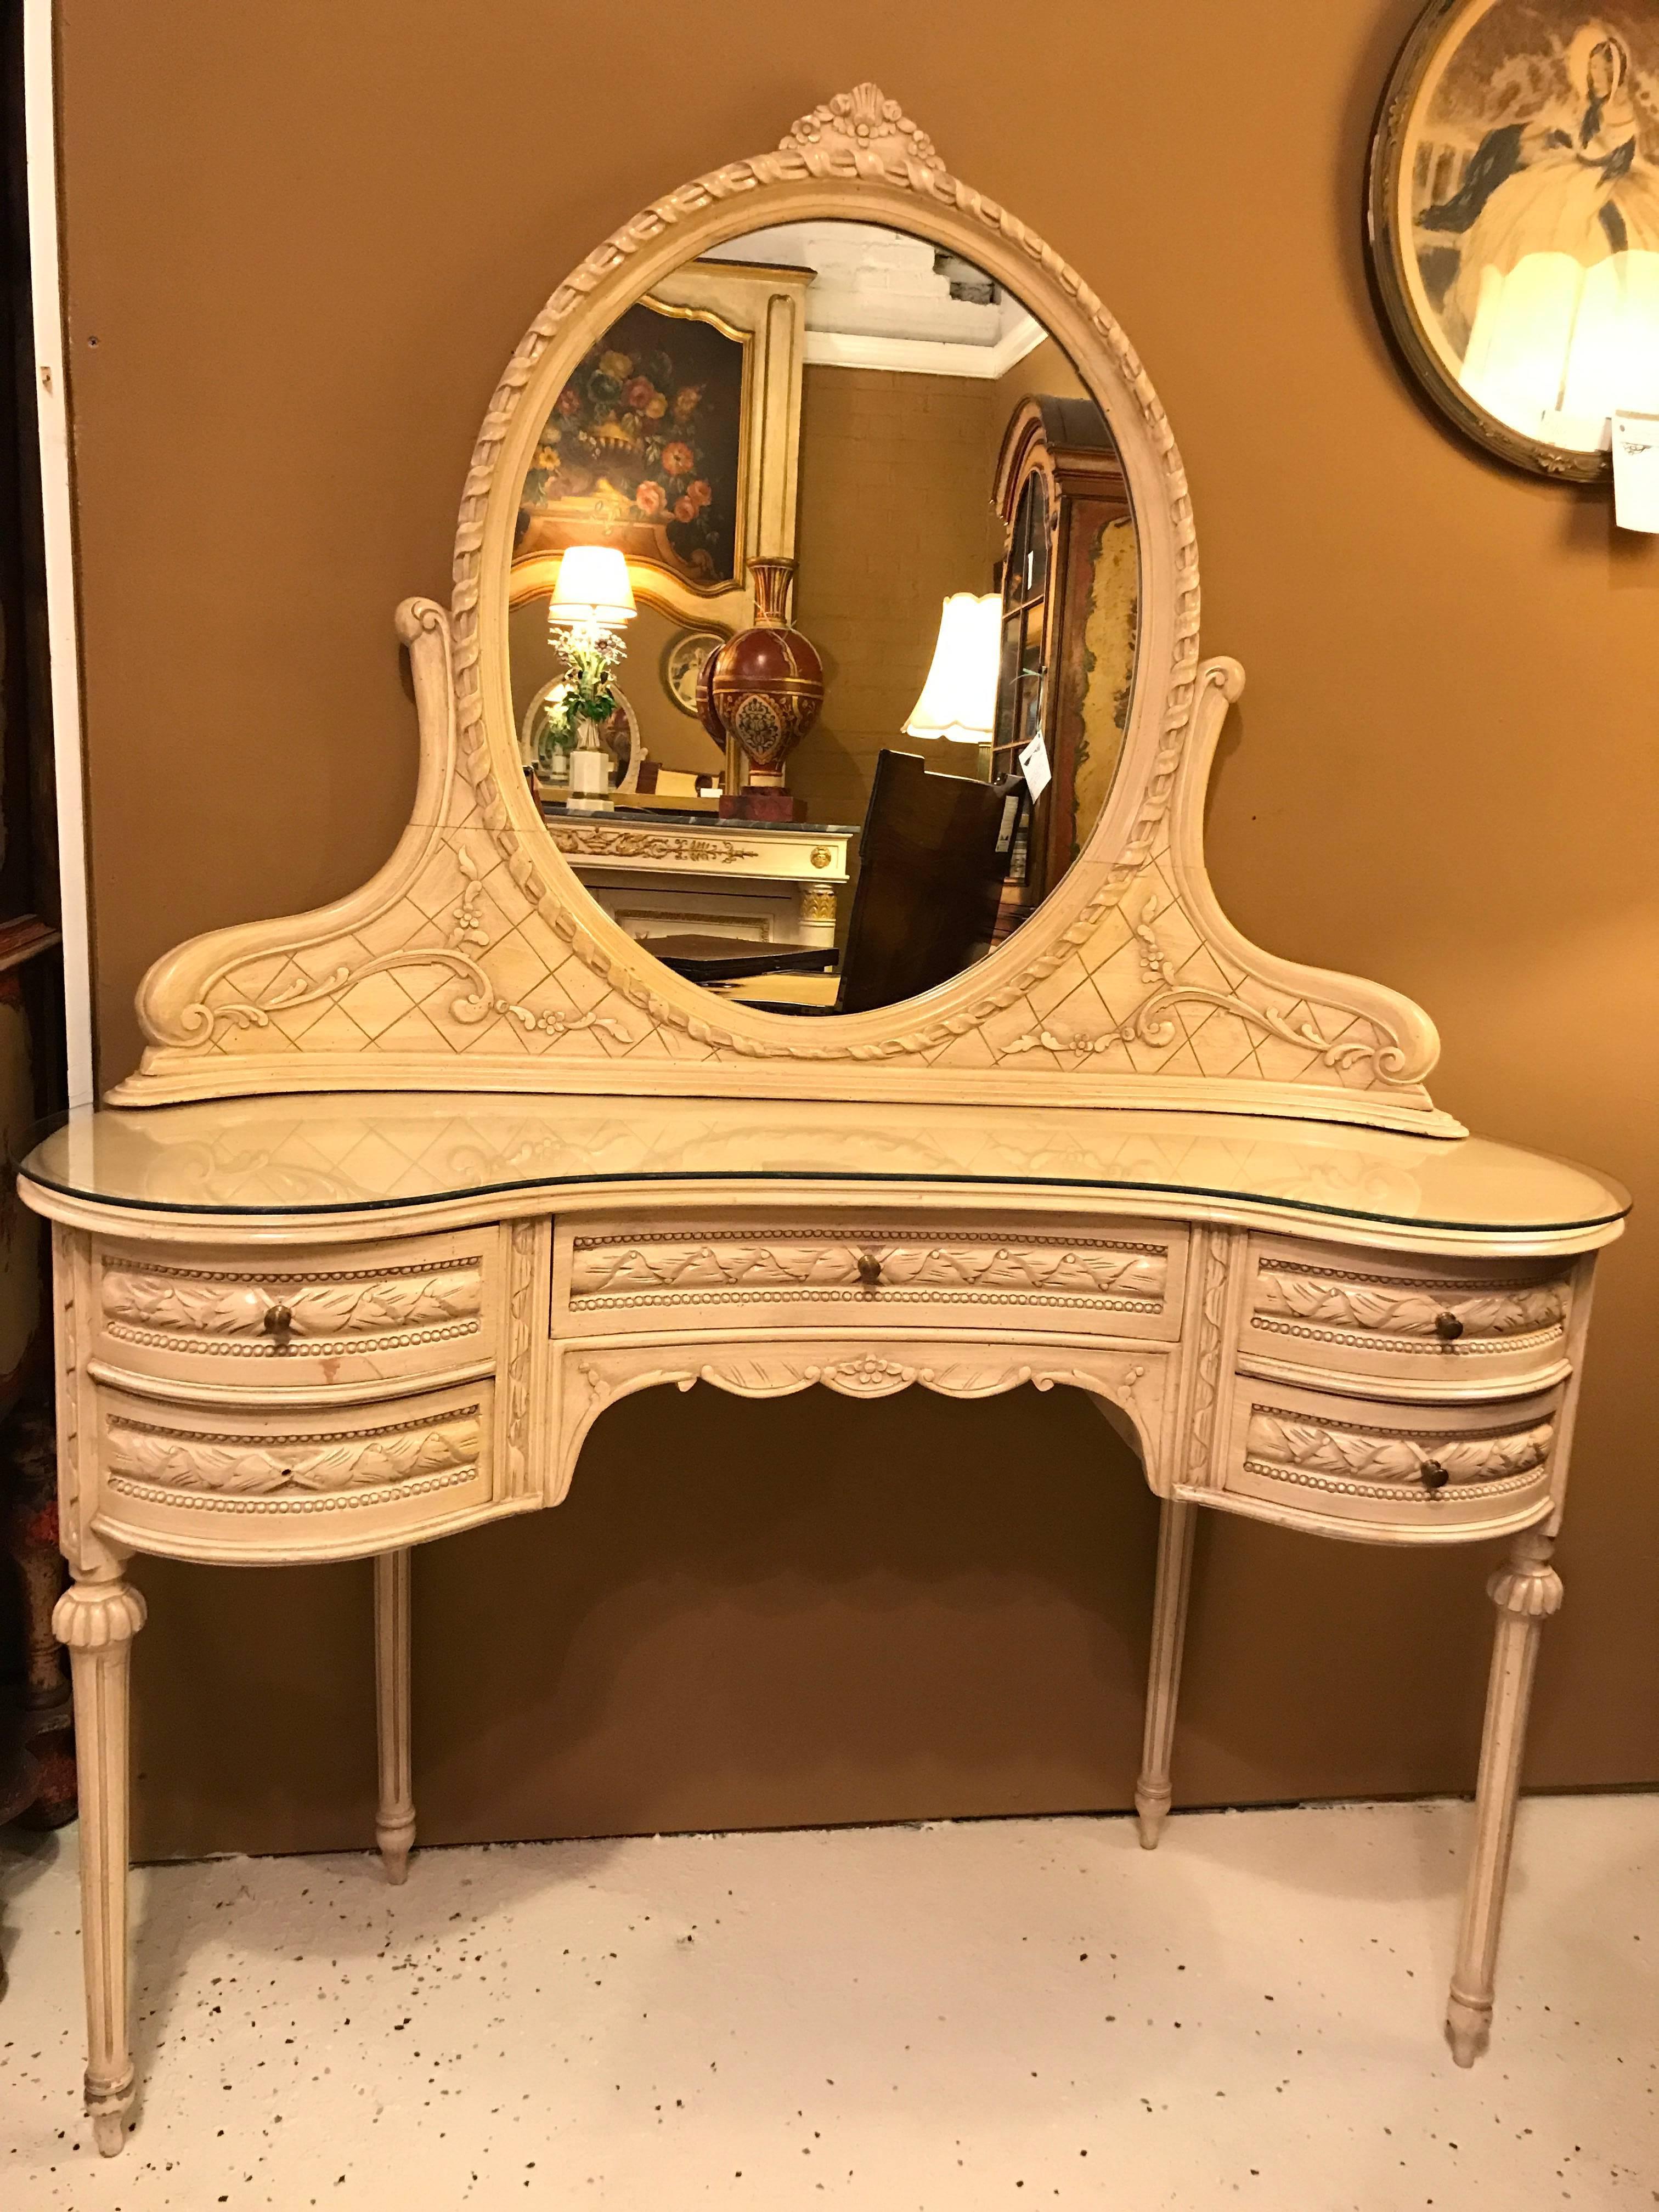 A Hollywood Regency vanity desk with mirror and chair in Swedish Fashion. This Louis XVI style vanity desk has five drawers and an oval detachable mirror with a matching chair. The whole done in a distressed finish of off-white. A fitted glass top